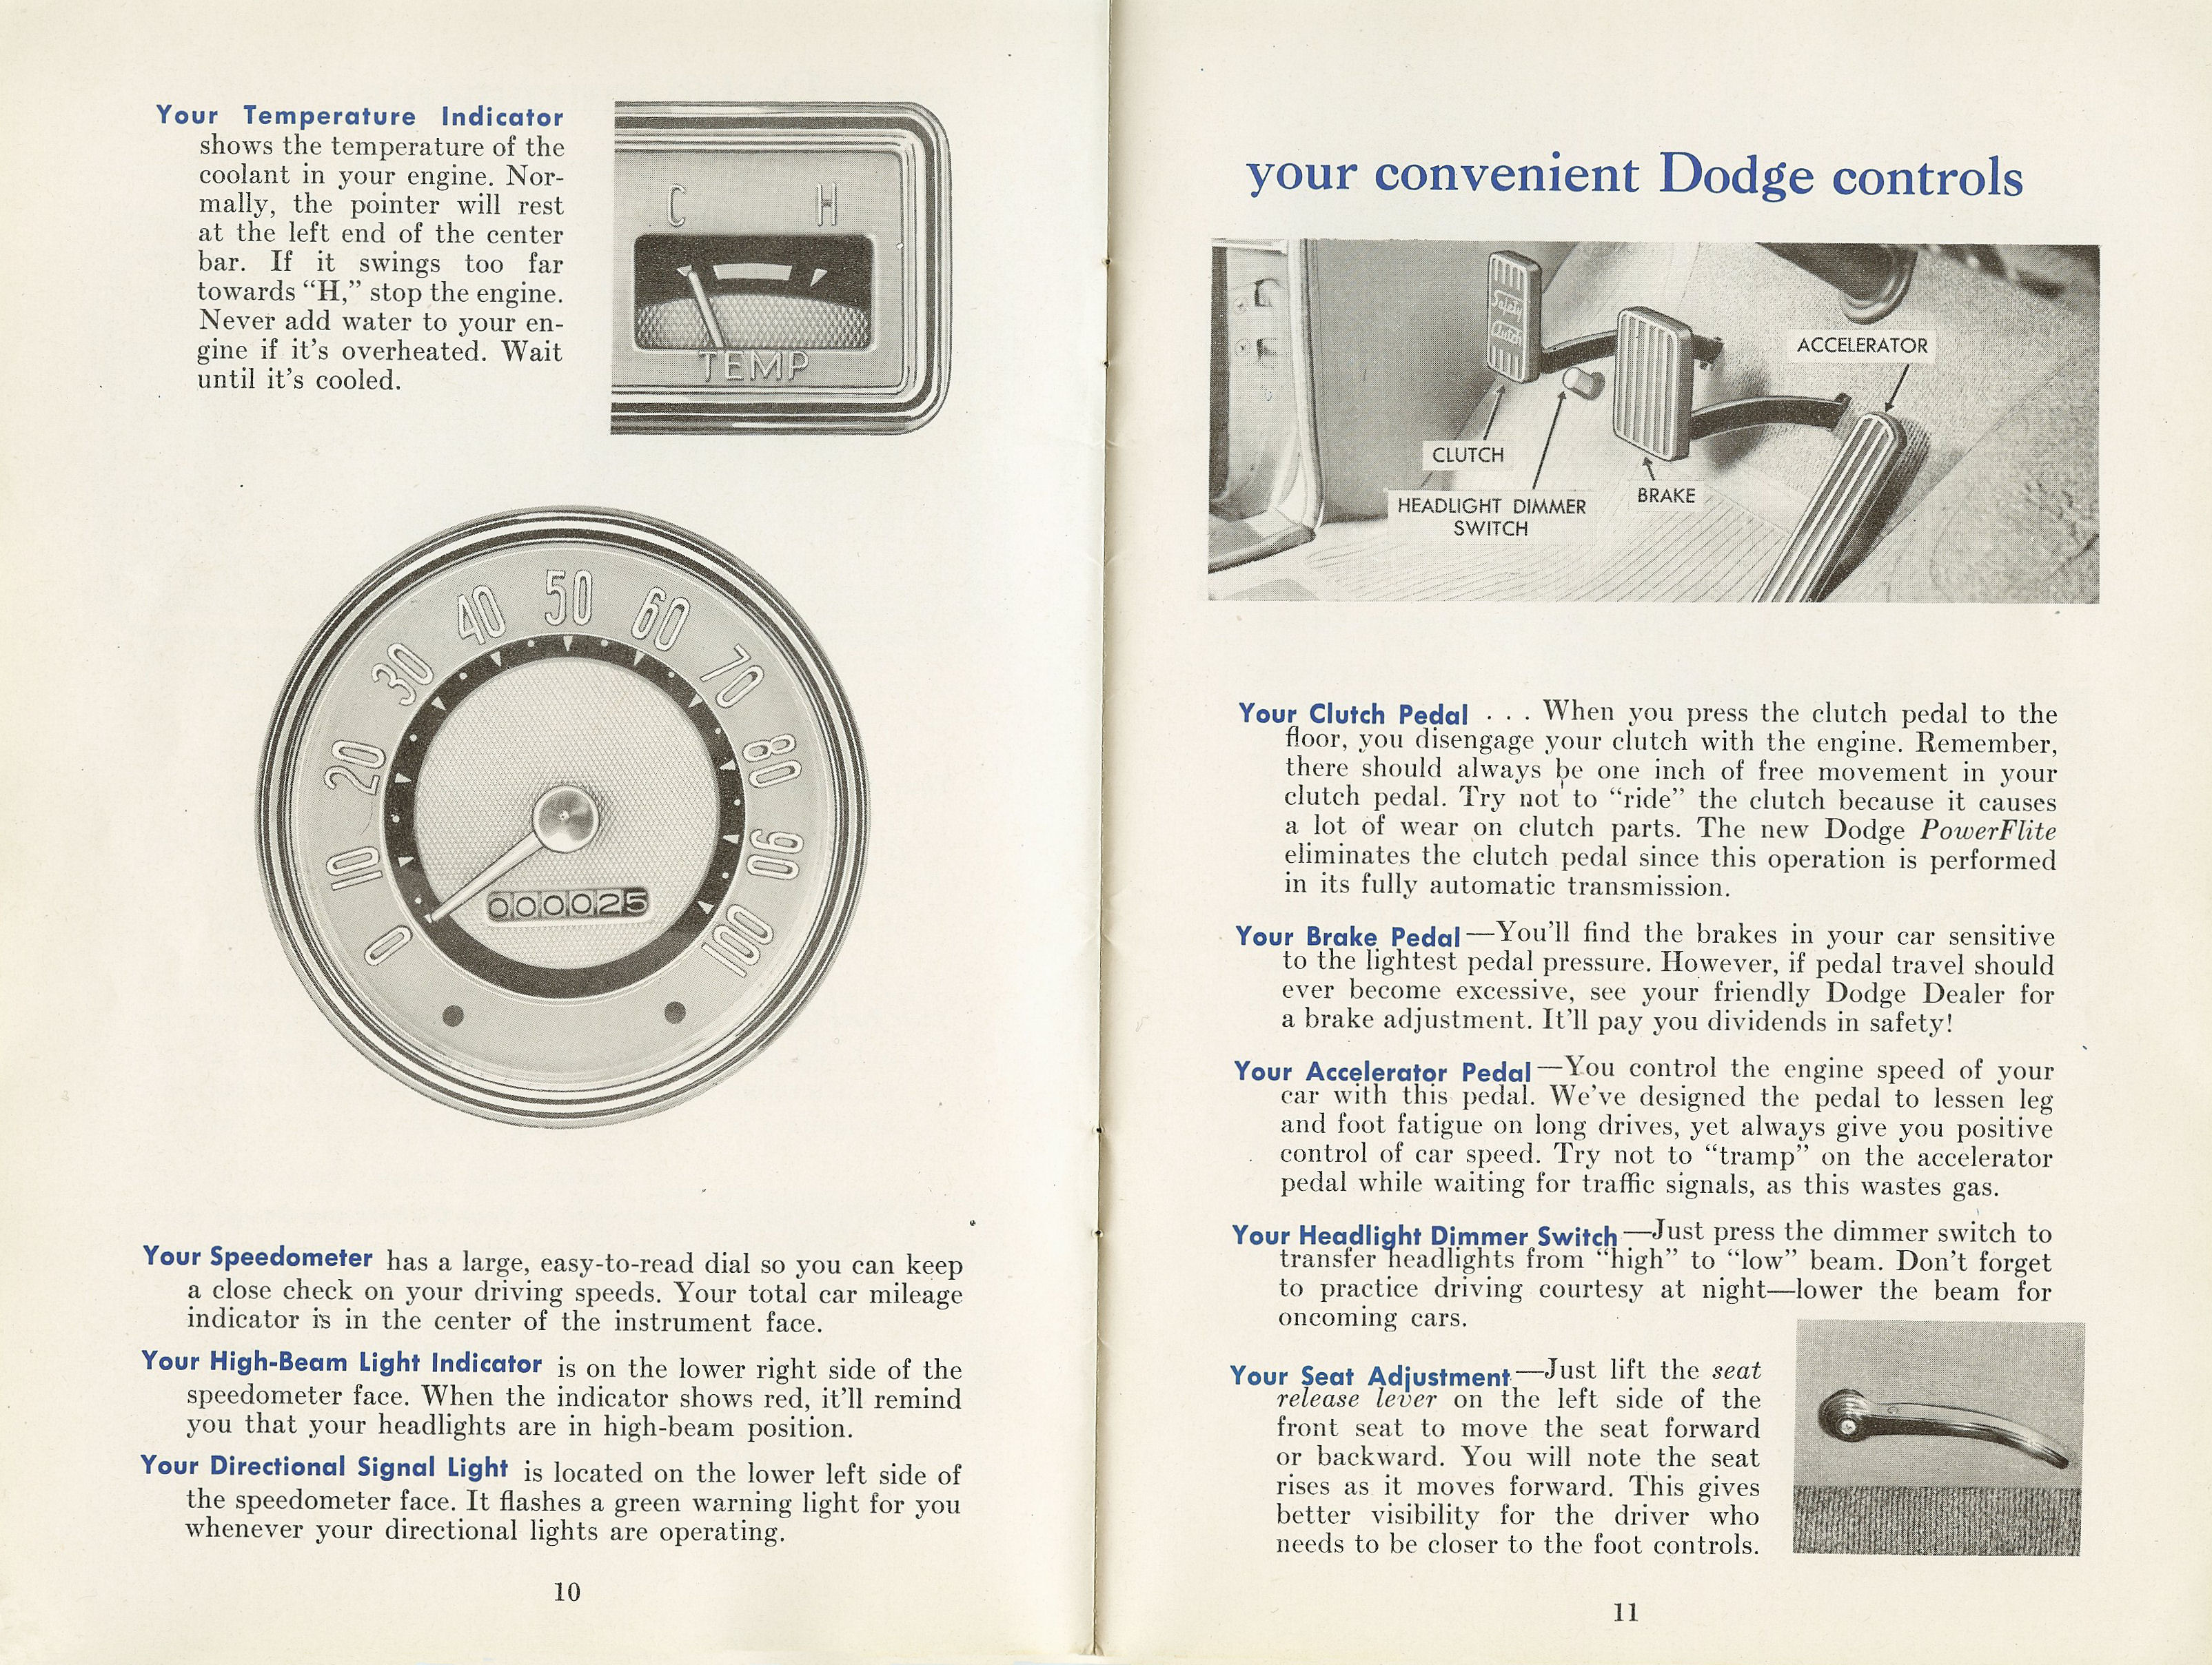 1954_Dodge_Owners_Manual-10-11